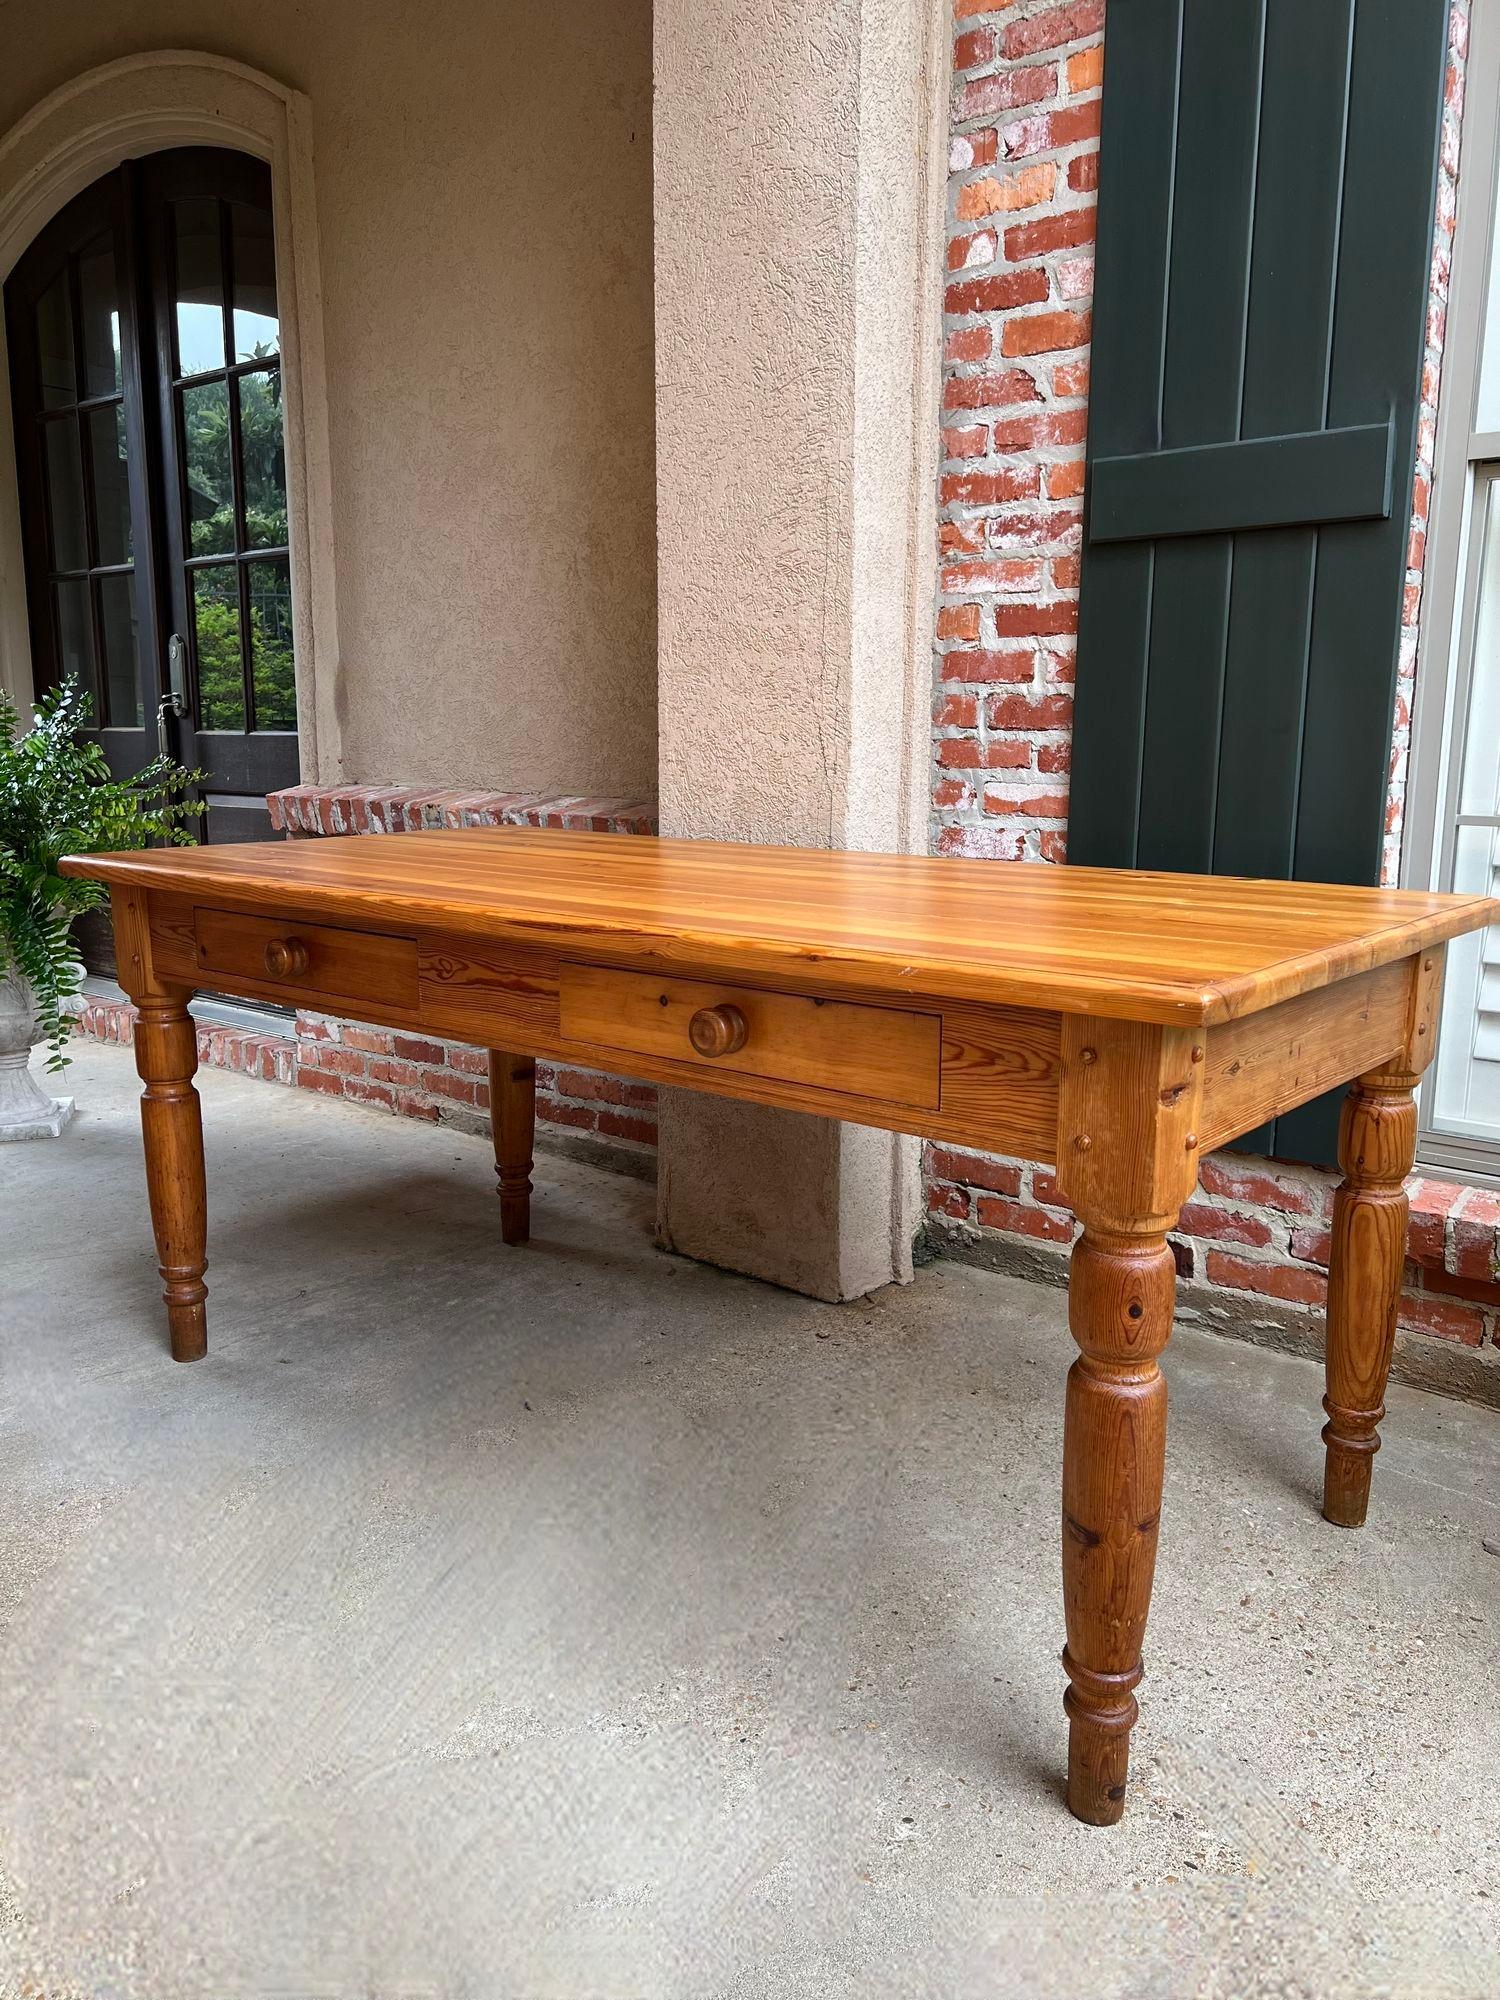 Vintage English Pine Farm Dining Table Kitchen Island Sofa Table Farmhouse.

Direct from England, (YES, our English container finally arrived, and we have some amazing English antiques, and of course, lots of barley twist)!
This LONG 6 ft. length is